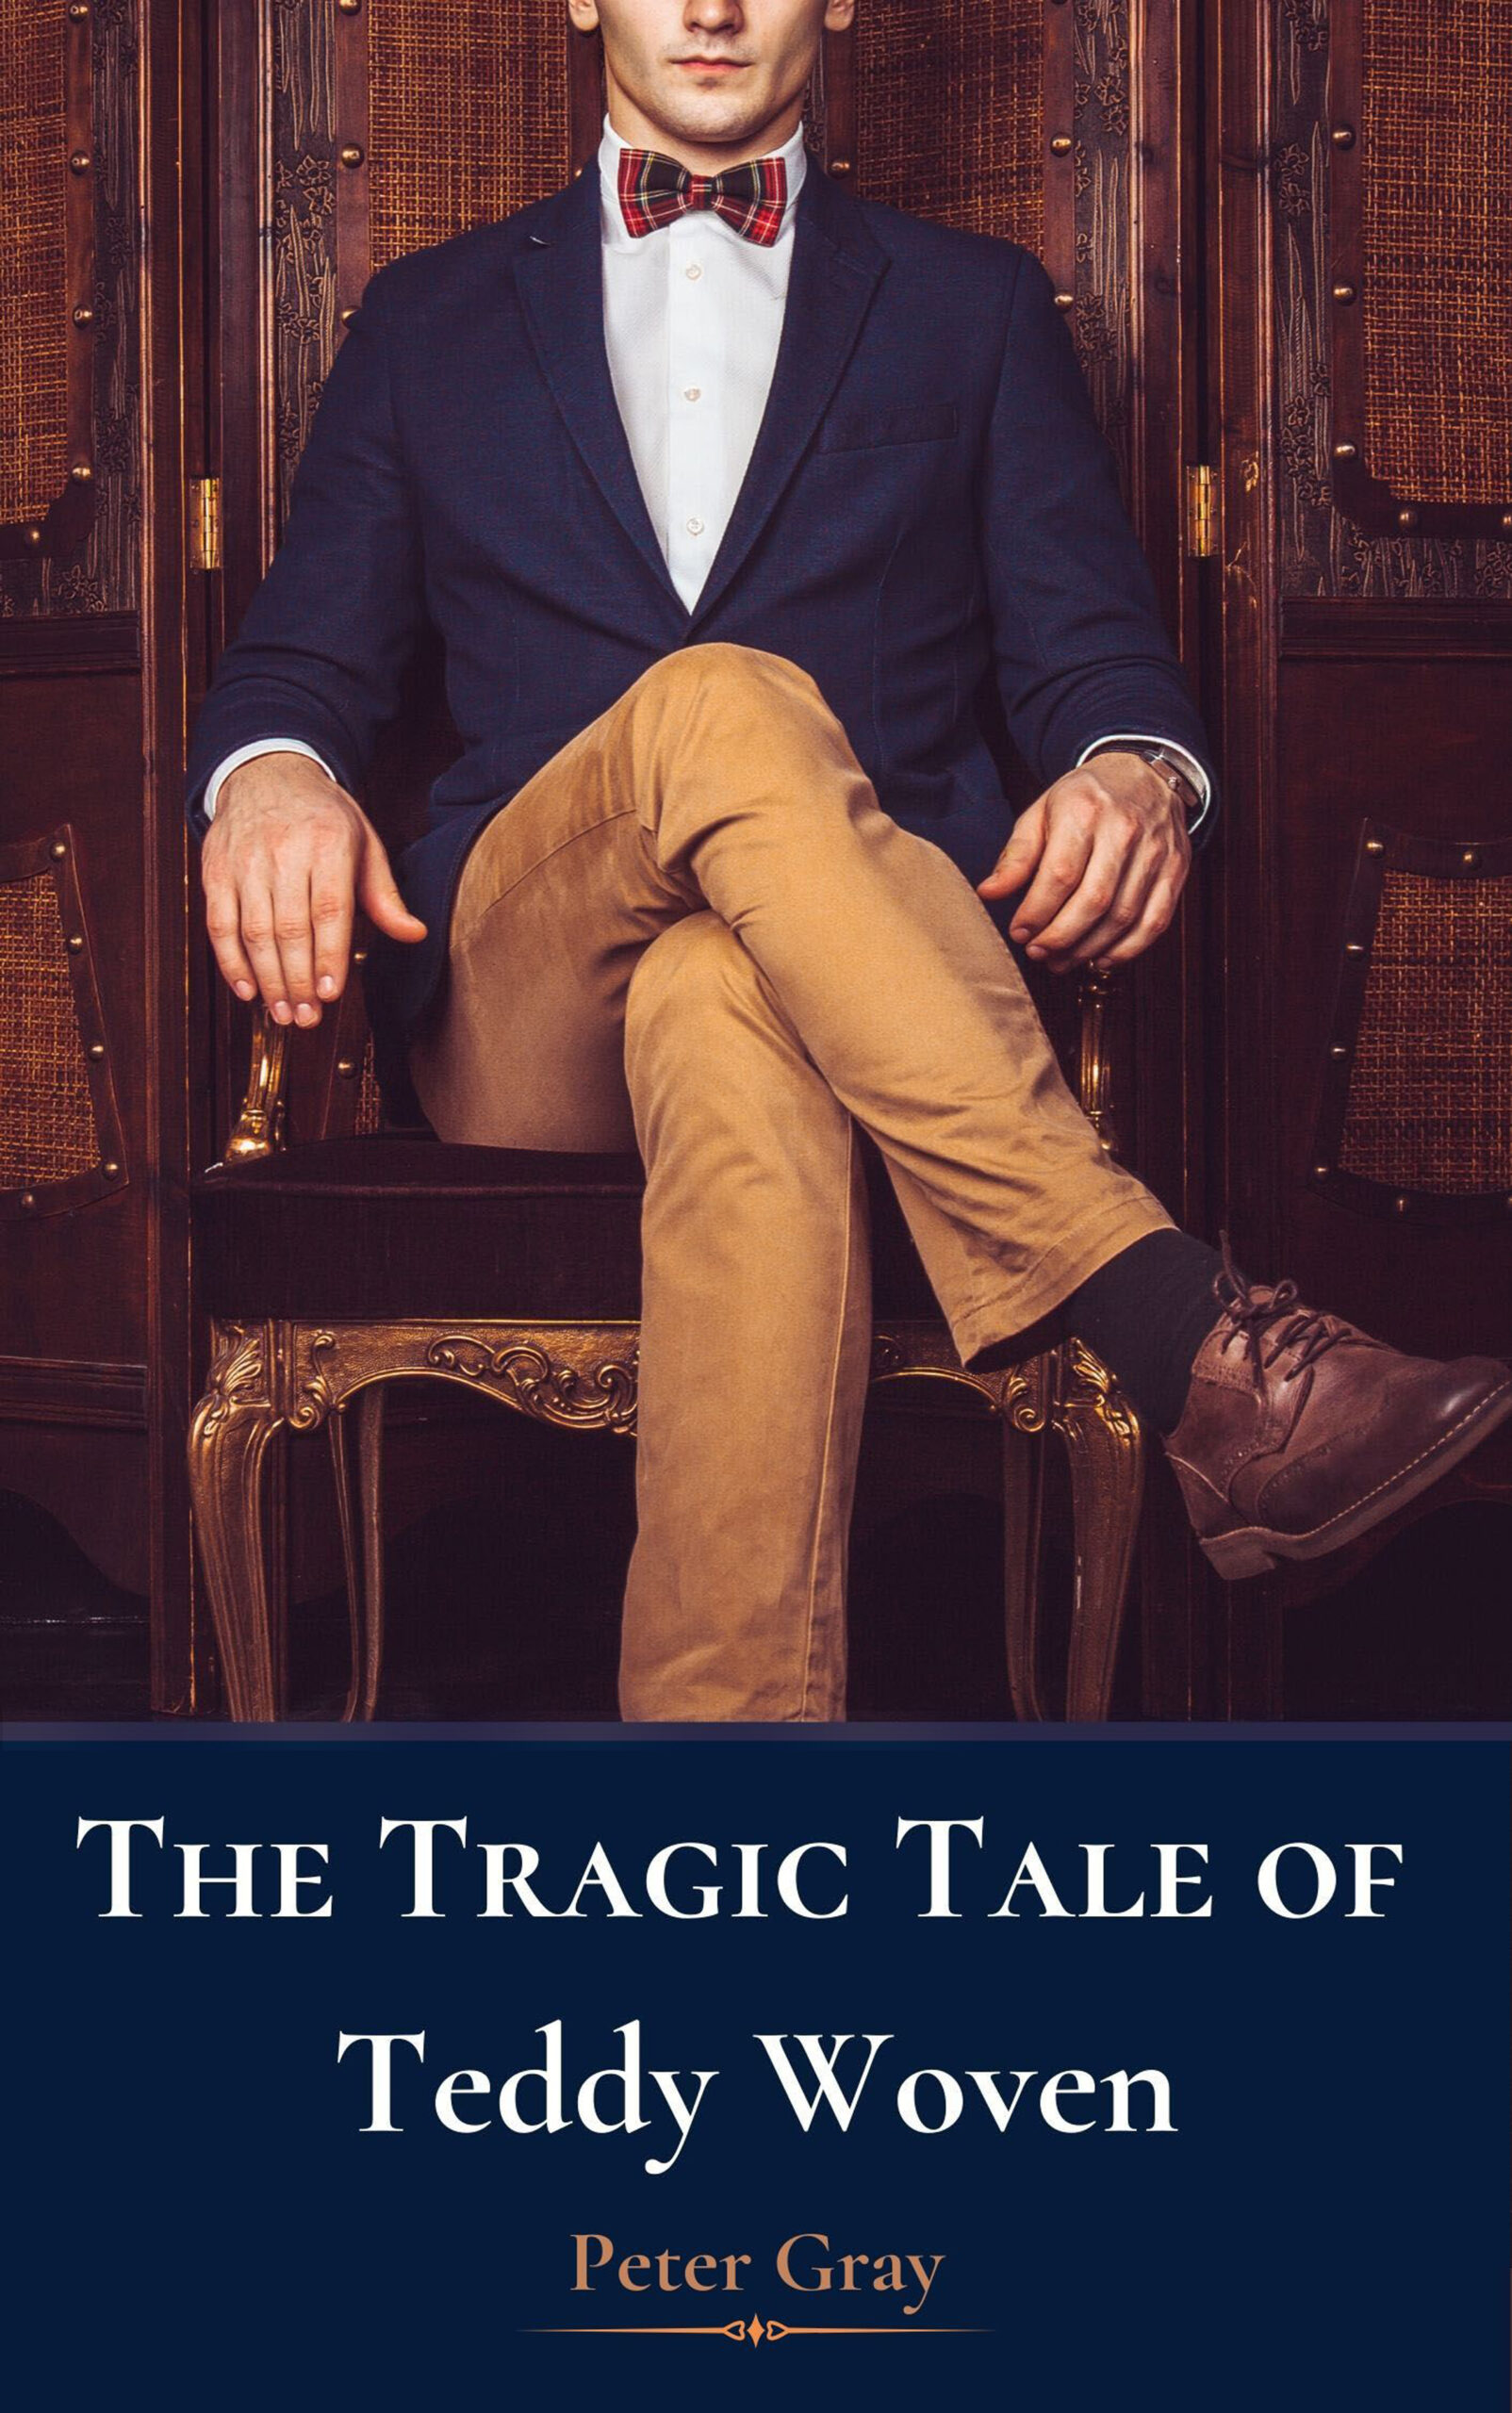 FREE: The Tragic Tale of Teddy Woven by Peter Gray